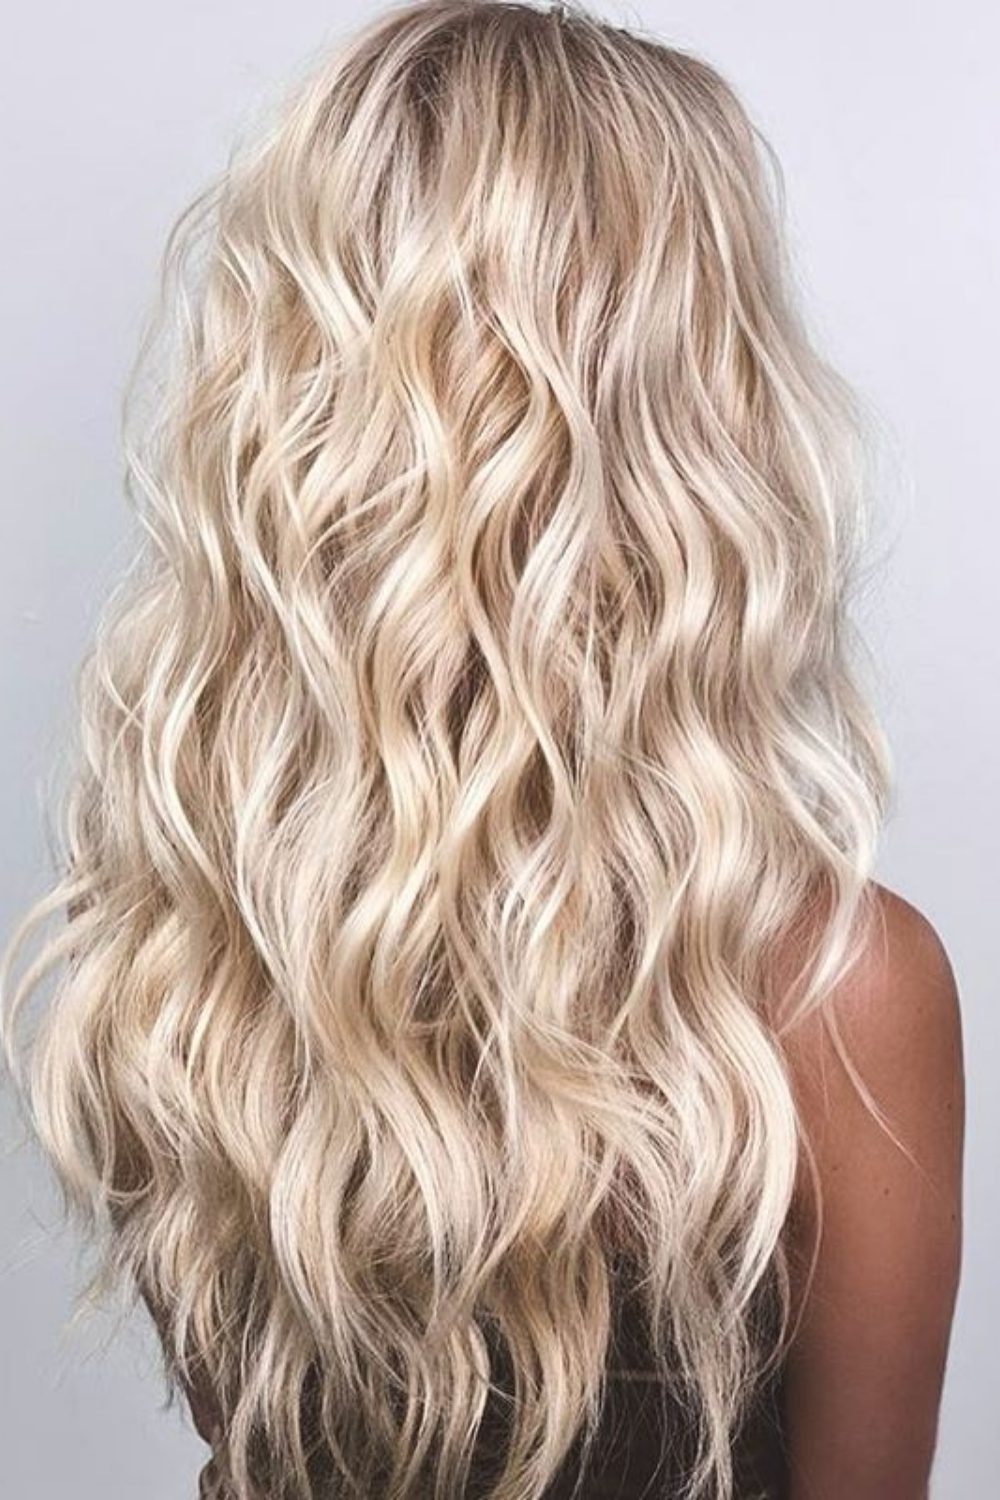 Achieve Effortless Beach Waves for a Flawless Summer Look